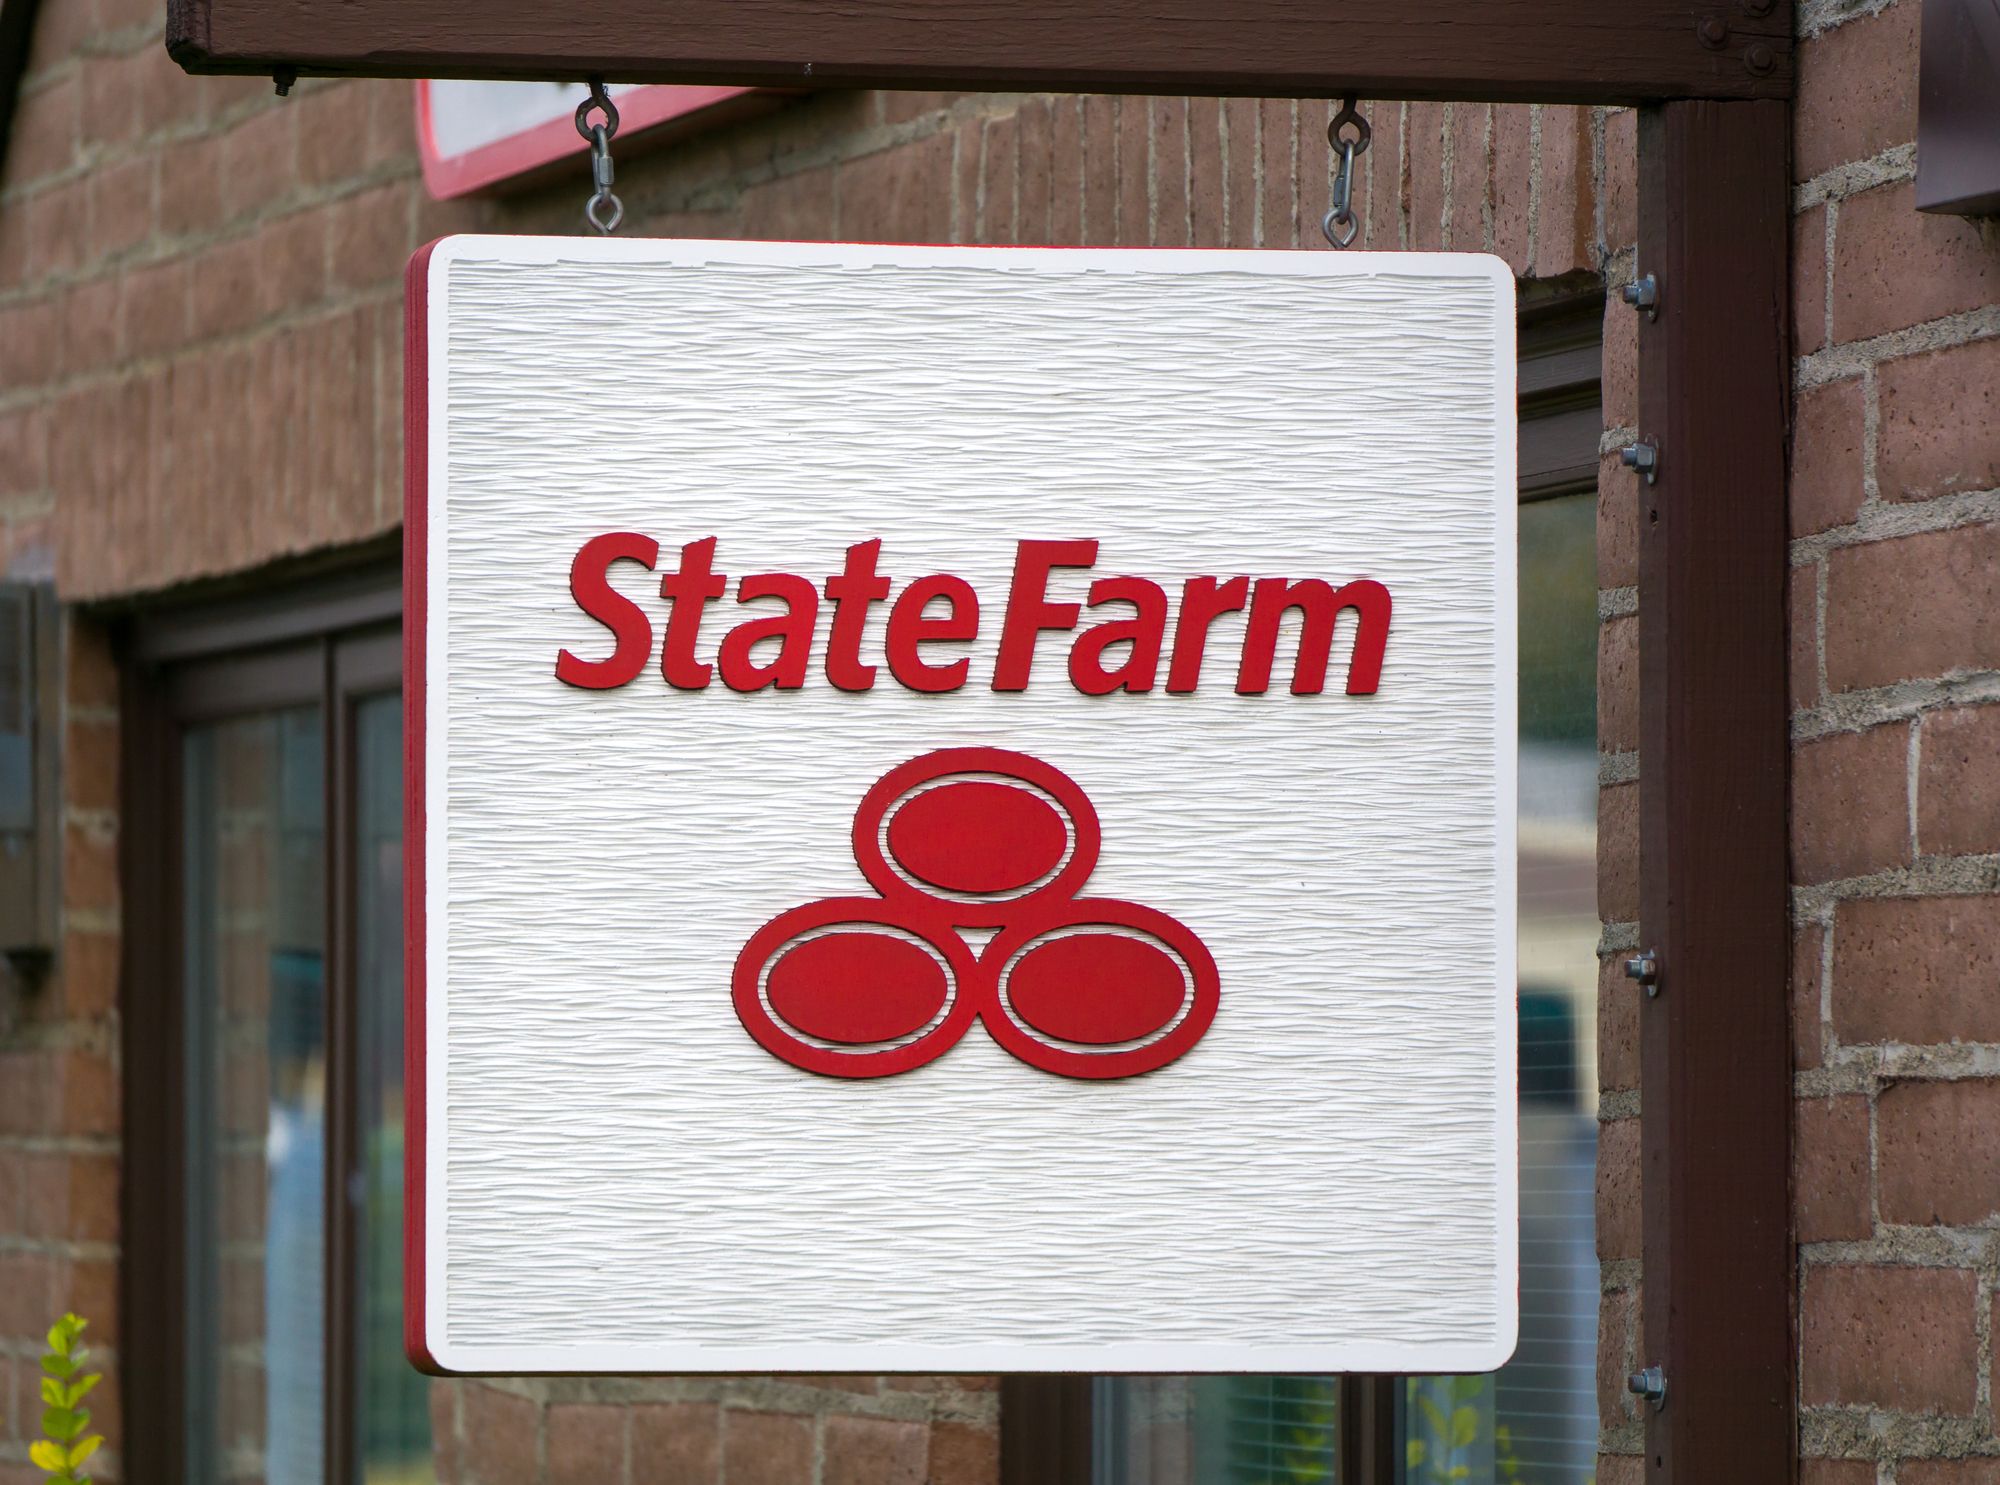 A business impacted by COVID-19 closures claims State Farm premiums are unjust.